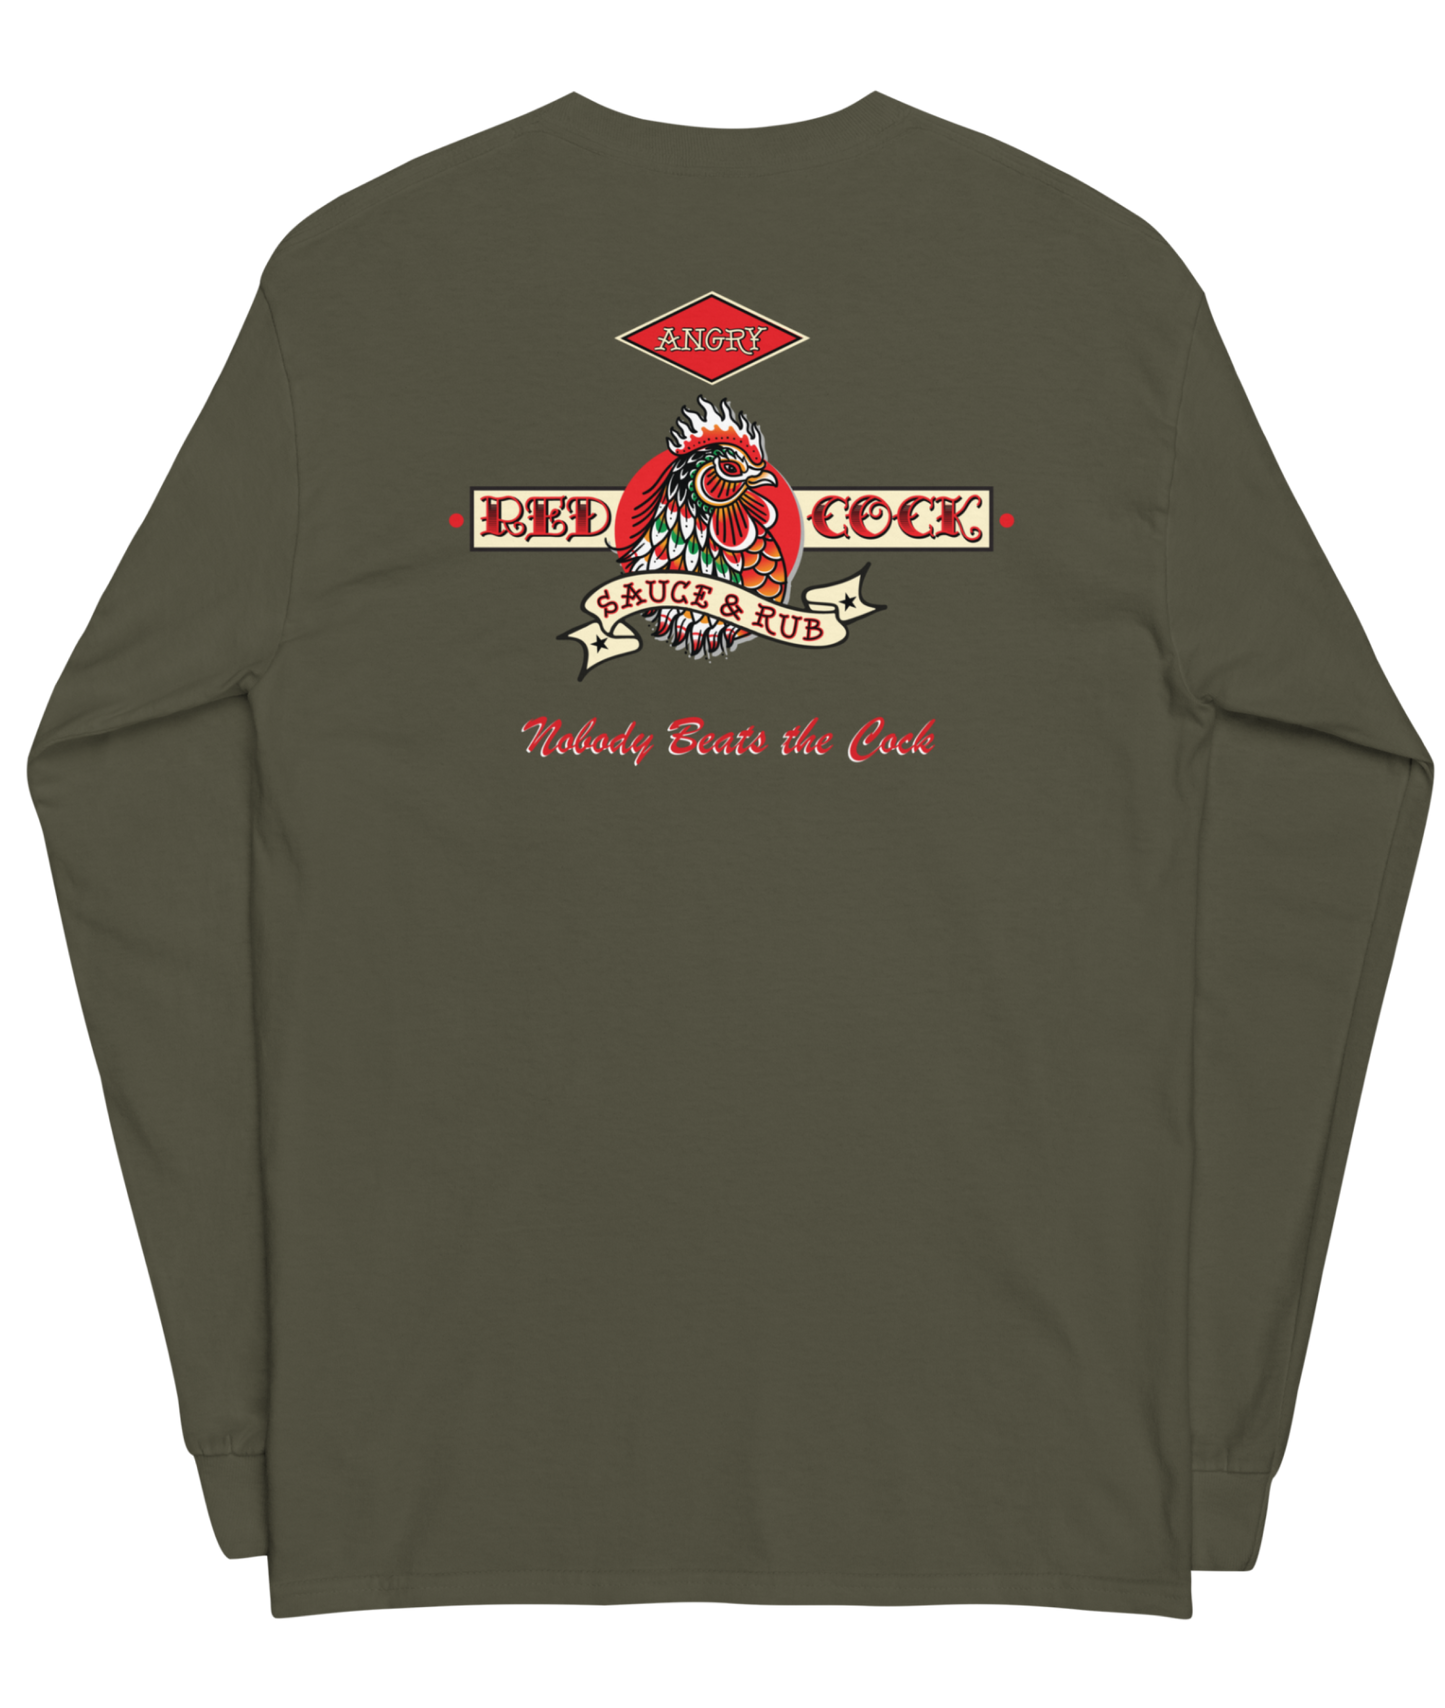 The Angry Red Cock Long Sleeve Shirt from Angry Red Cock Sauce & Rub Handcrafted in the U.S.A. Nobody Beats the Cock